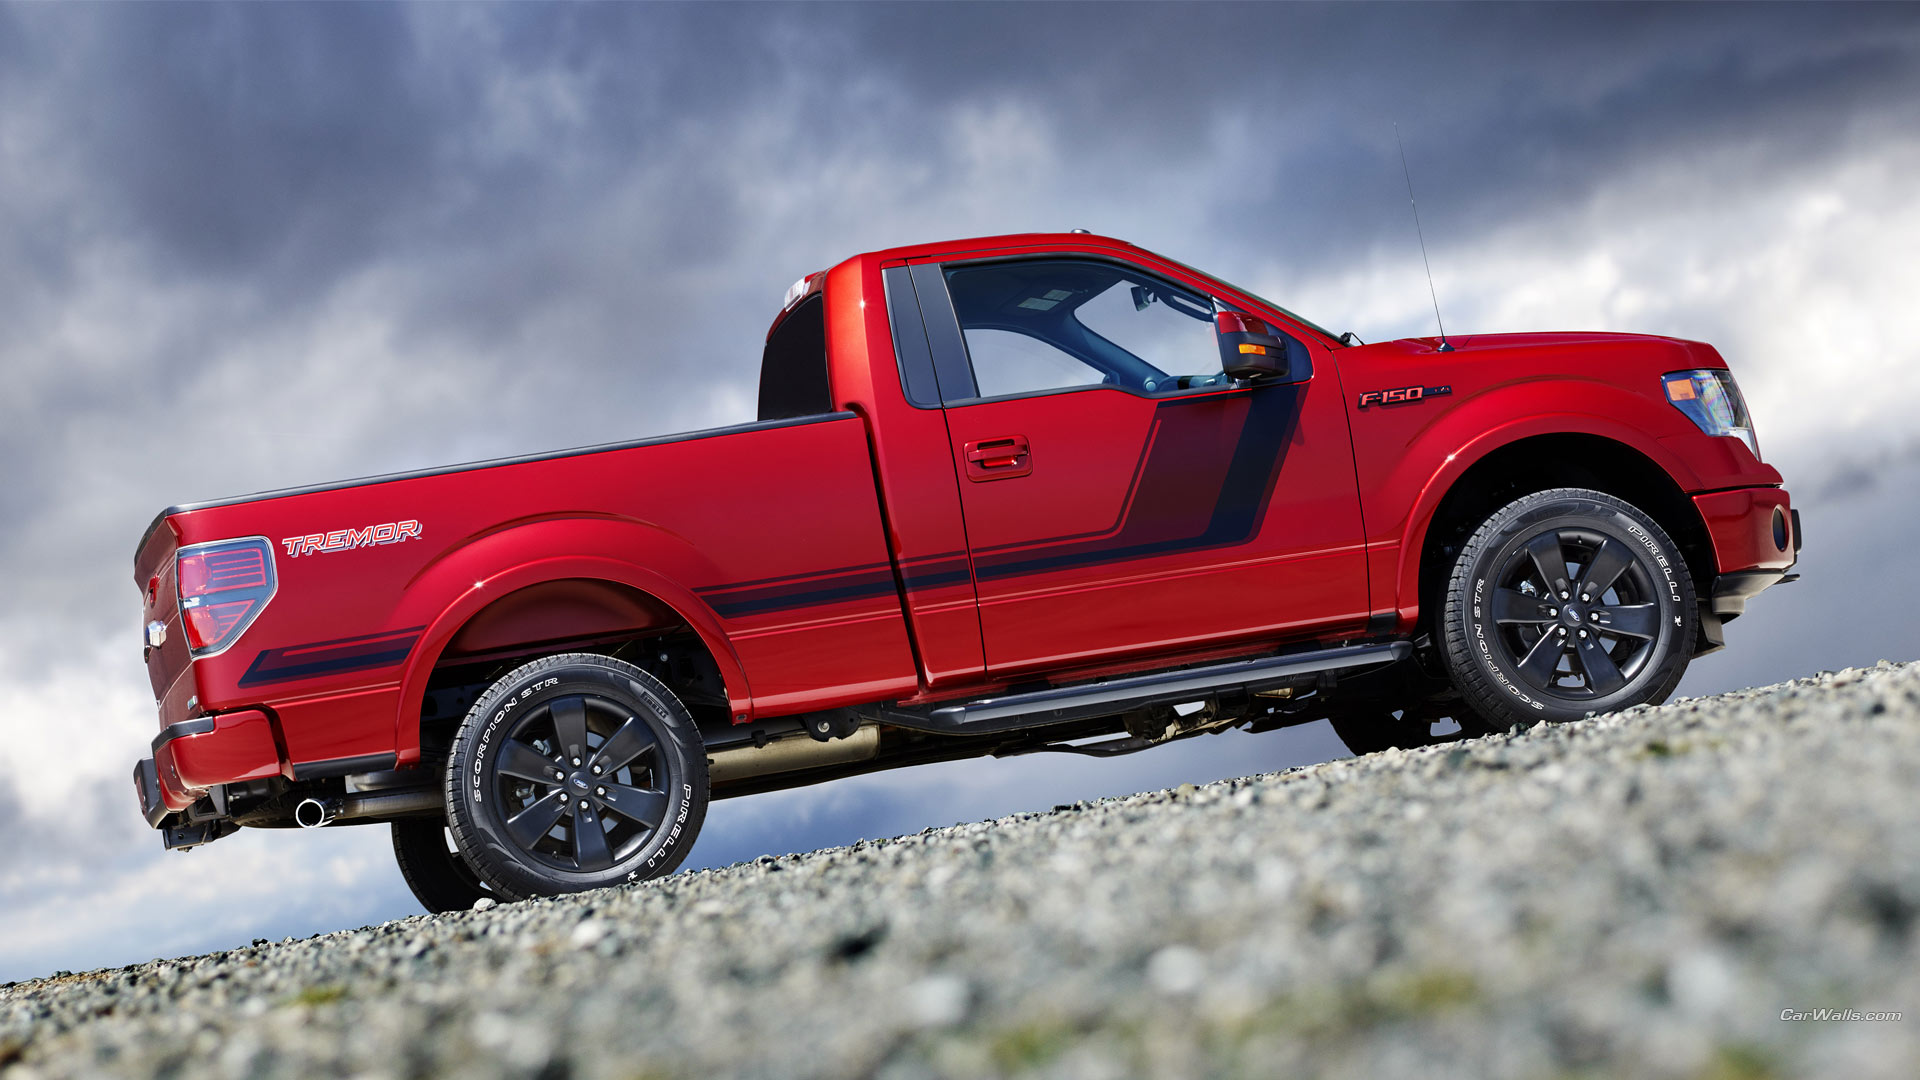 2014 Ford F-150 Tremor Wallpapers